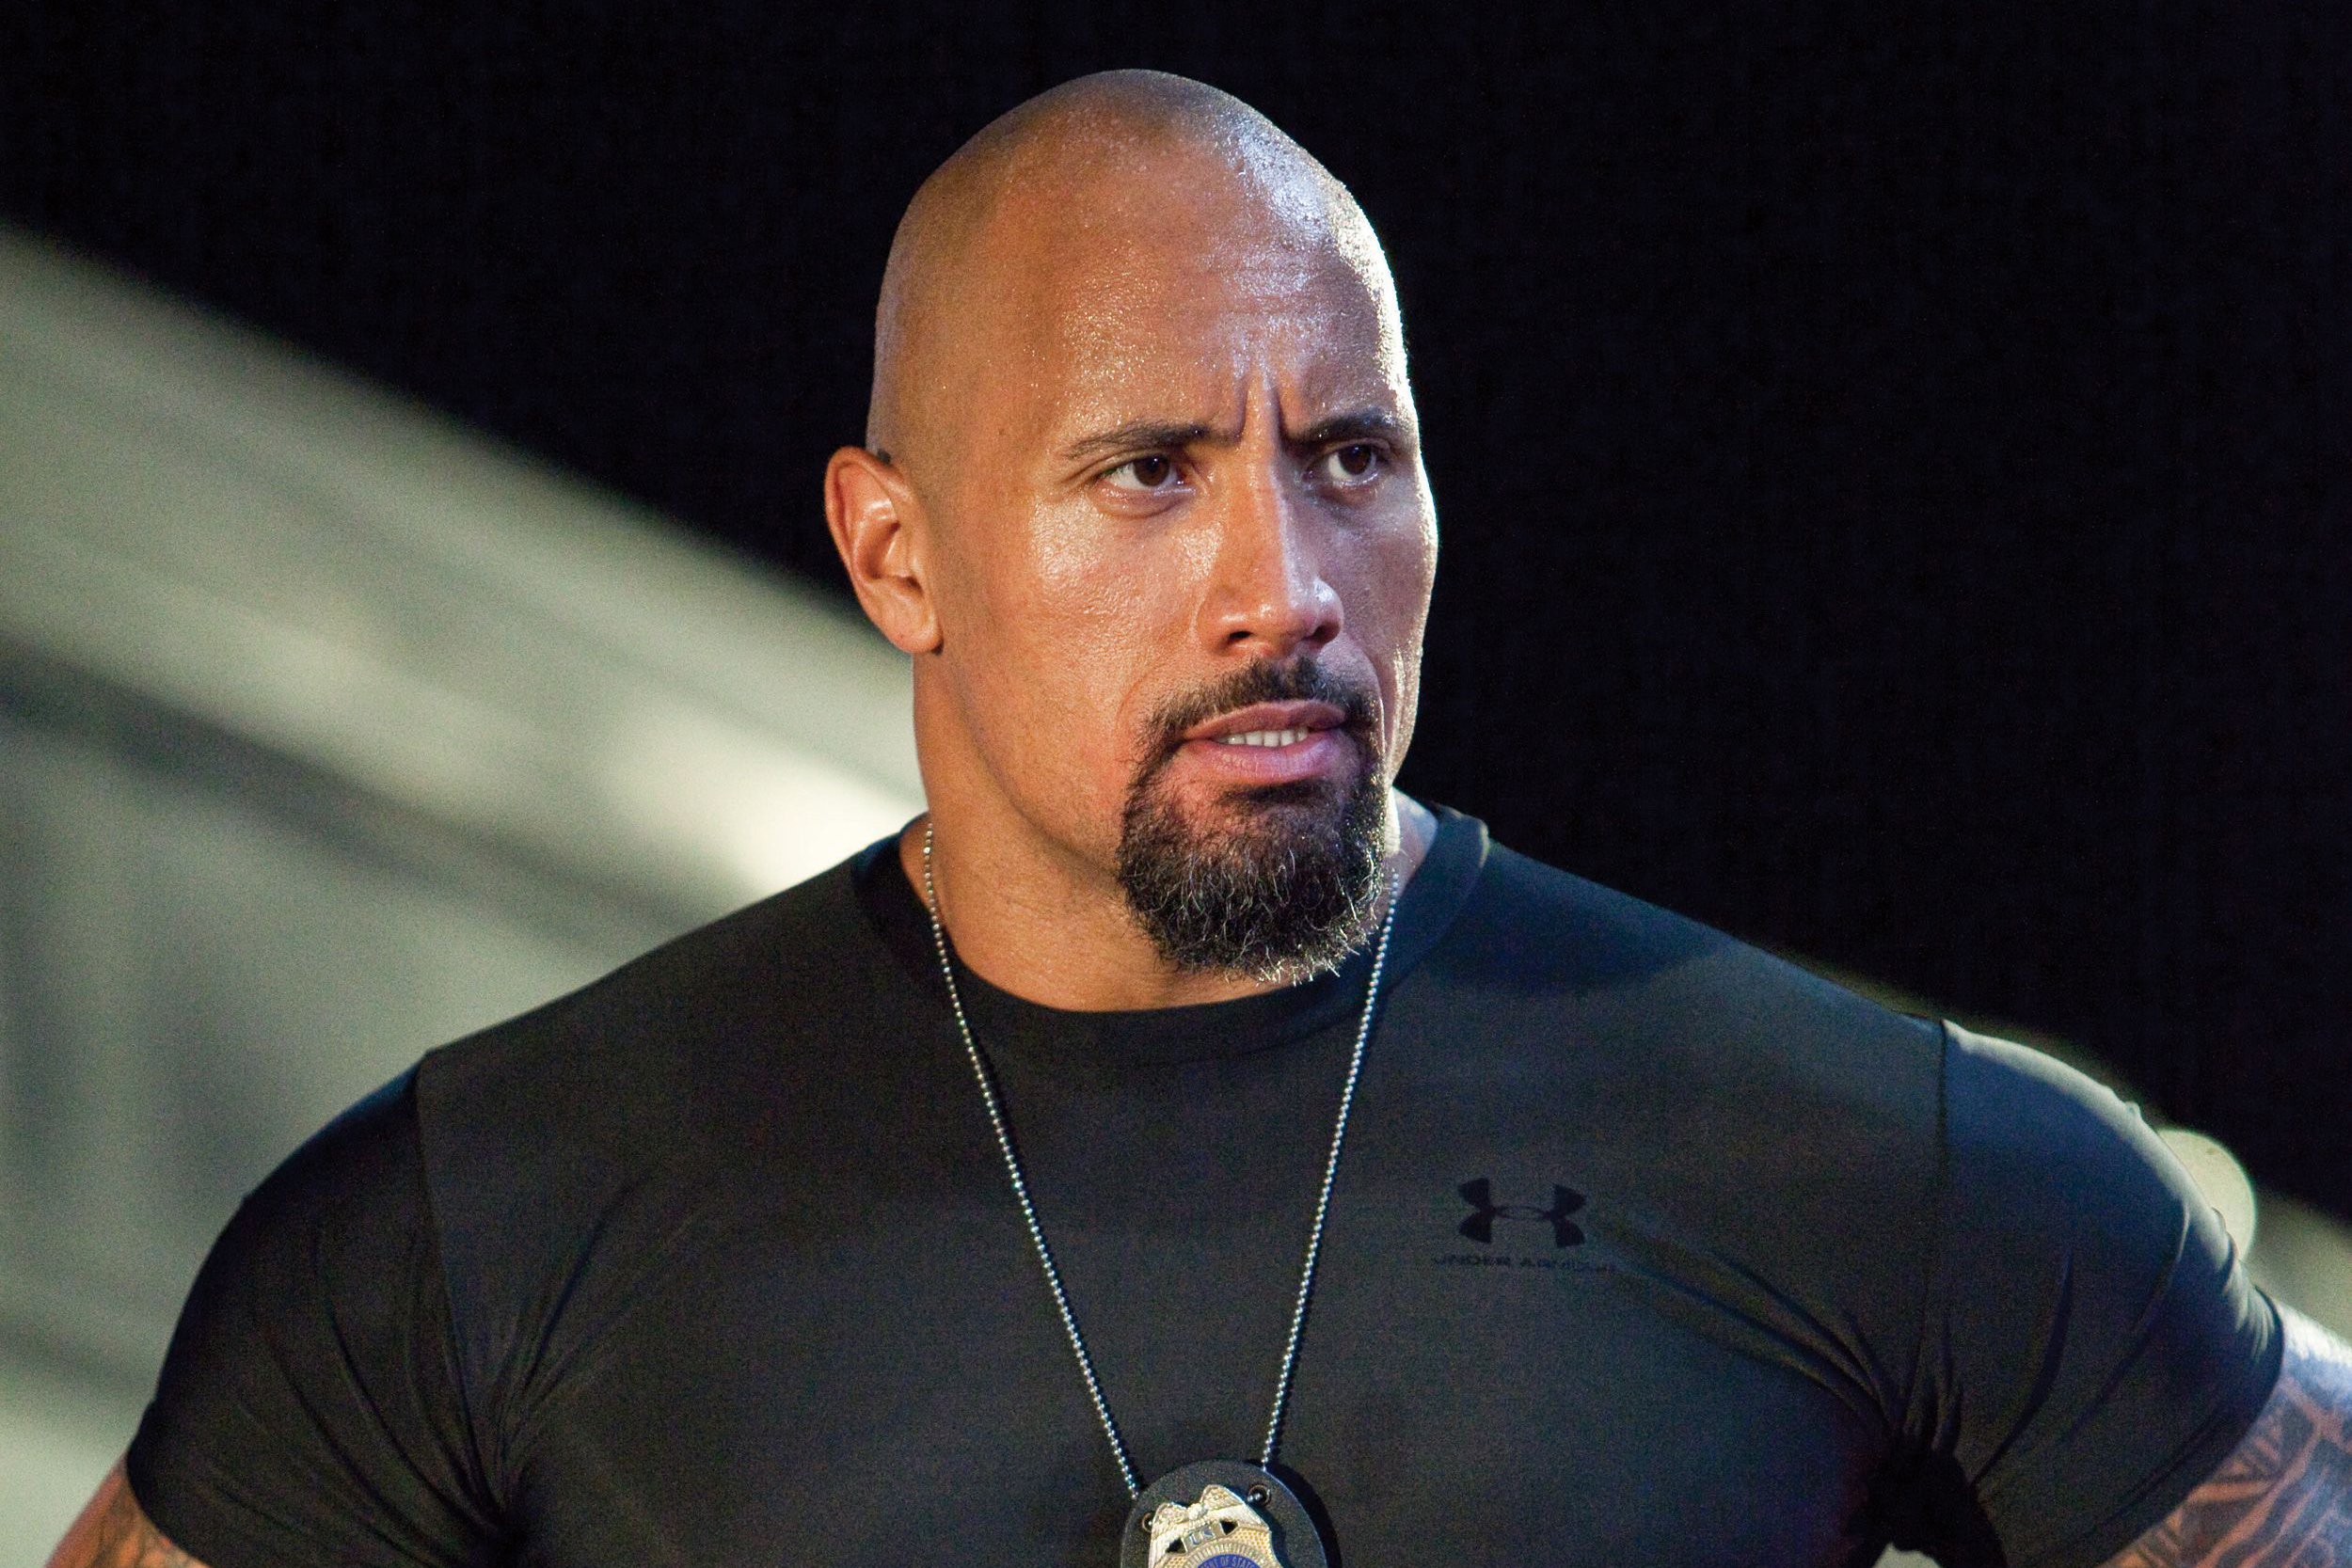 Desktop Wallpapers The Fast and the Furious Dwayne Johnson 2500x1667